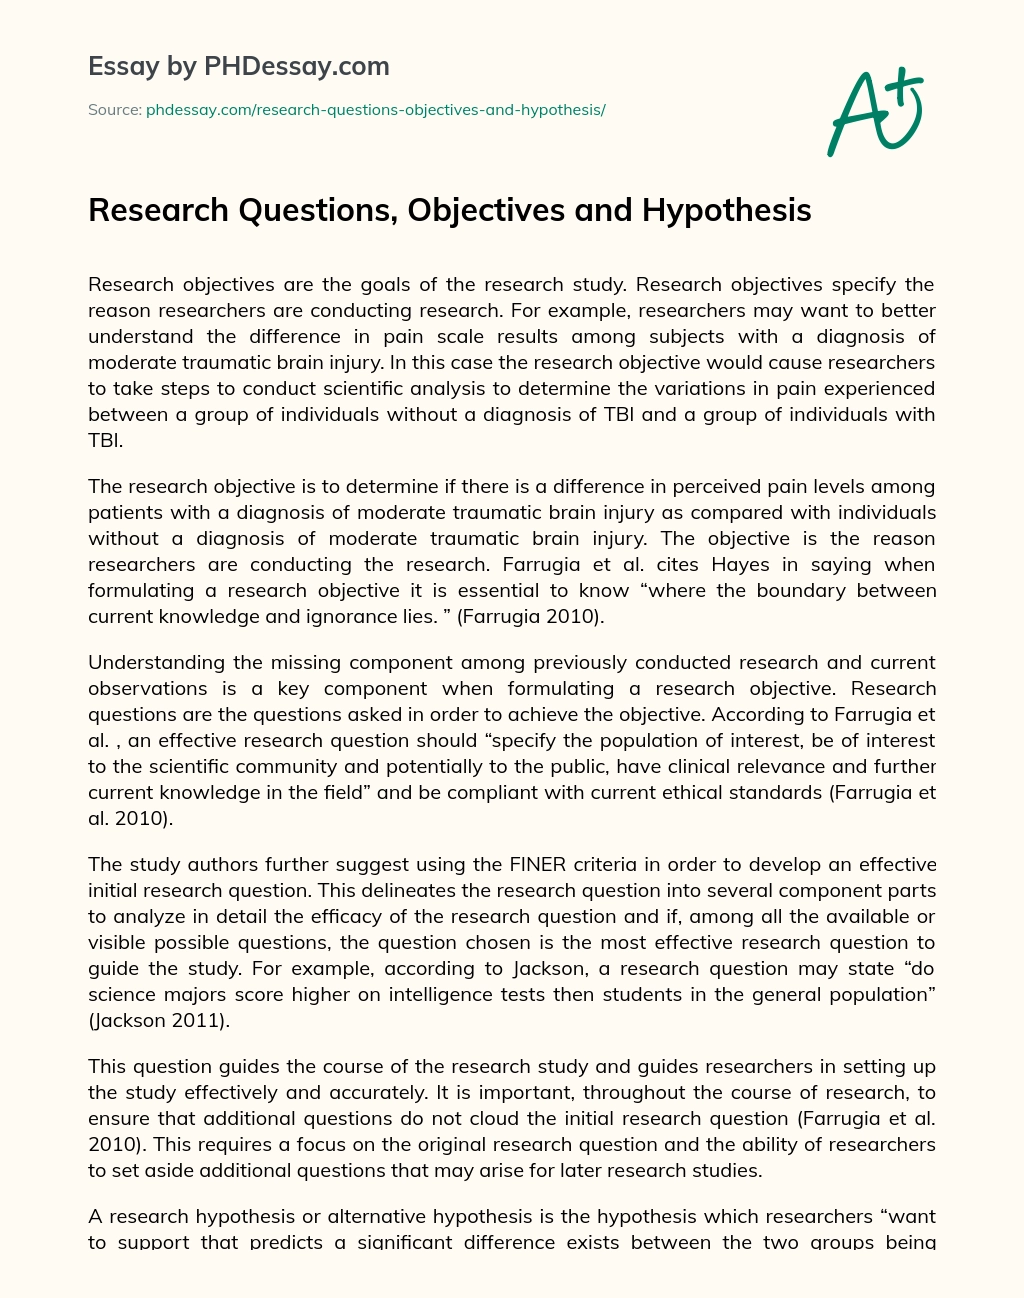 Research Questions, Objectives and Hypothesis essay